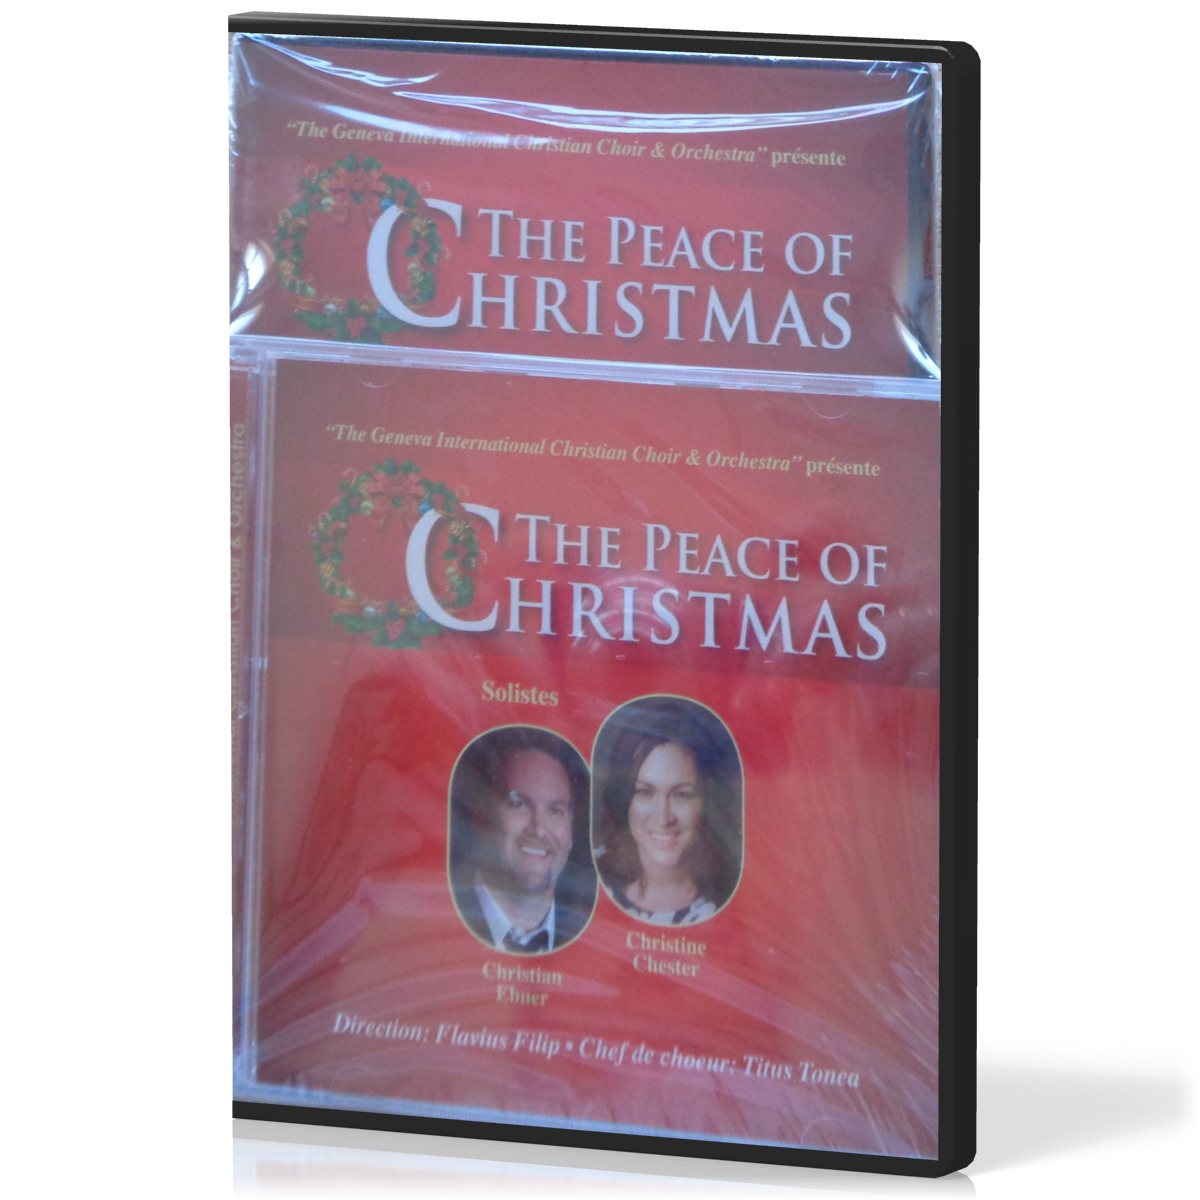 Peace of Christmas (The) - [2 CD + DVD] Concert 2014